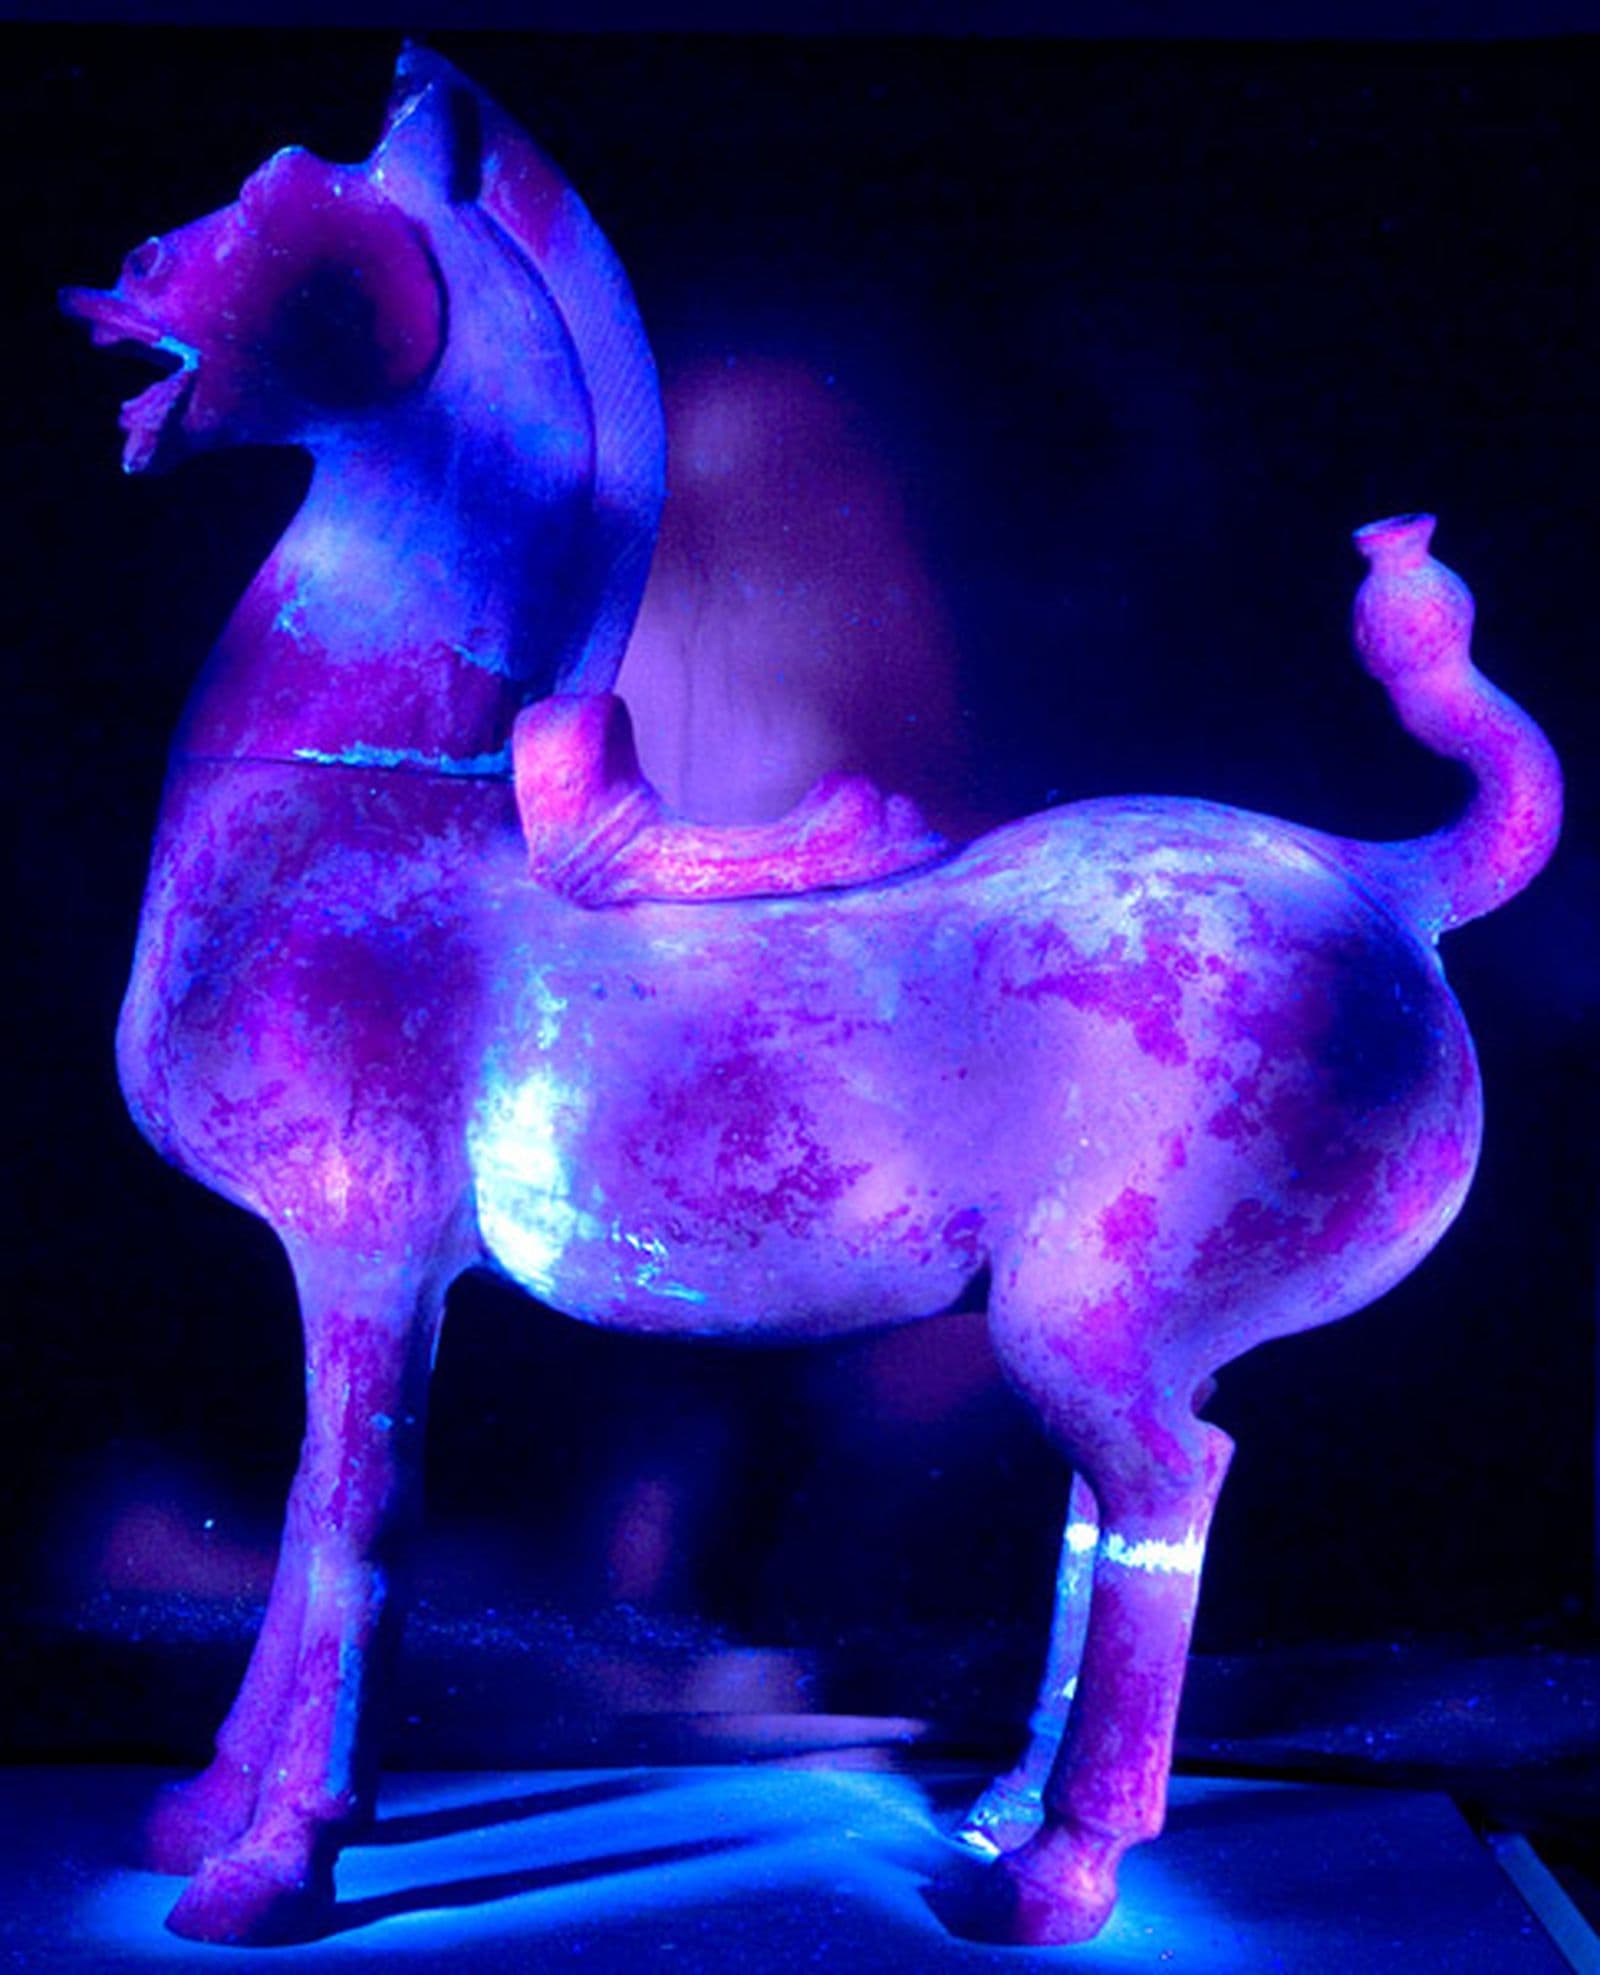 Ultraviolet image revealing locations of repairs and restorations via differing shades of purple light onhorse statue